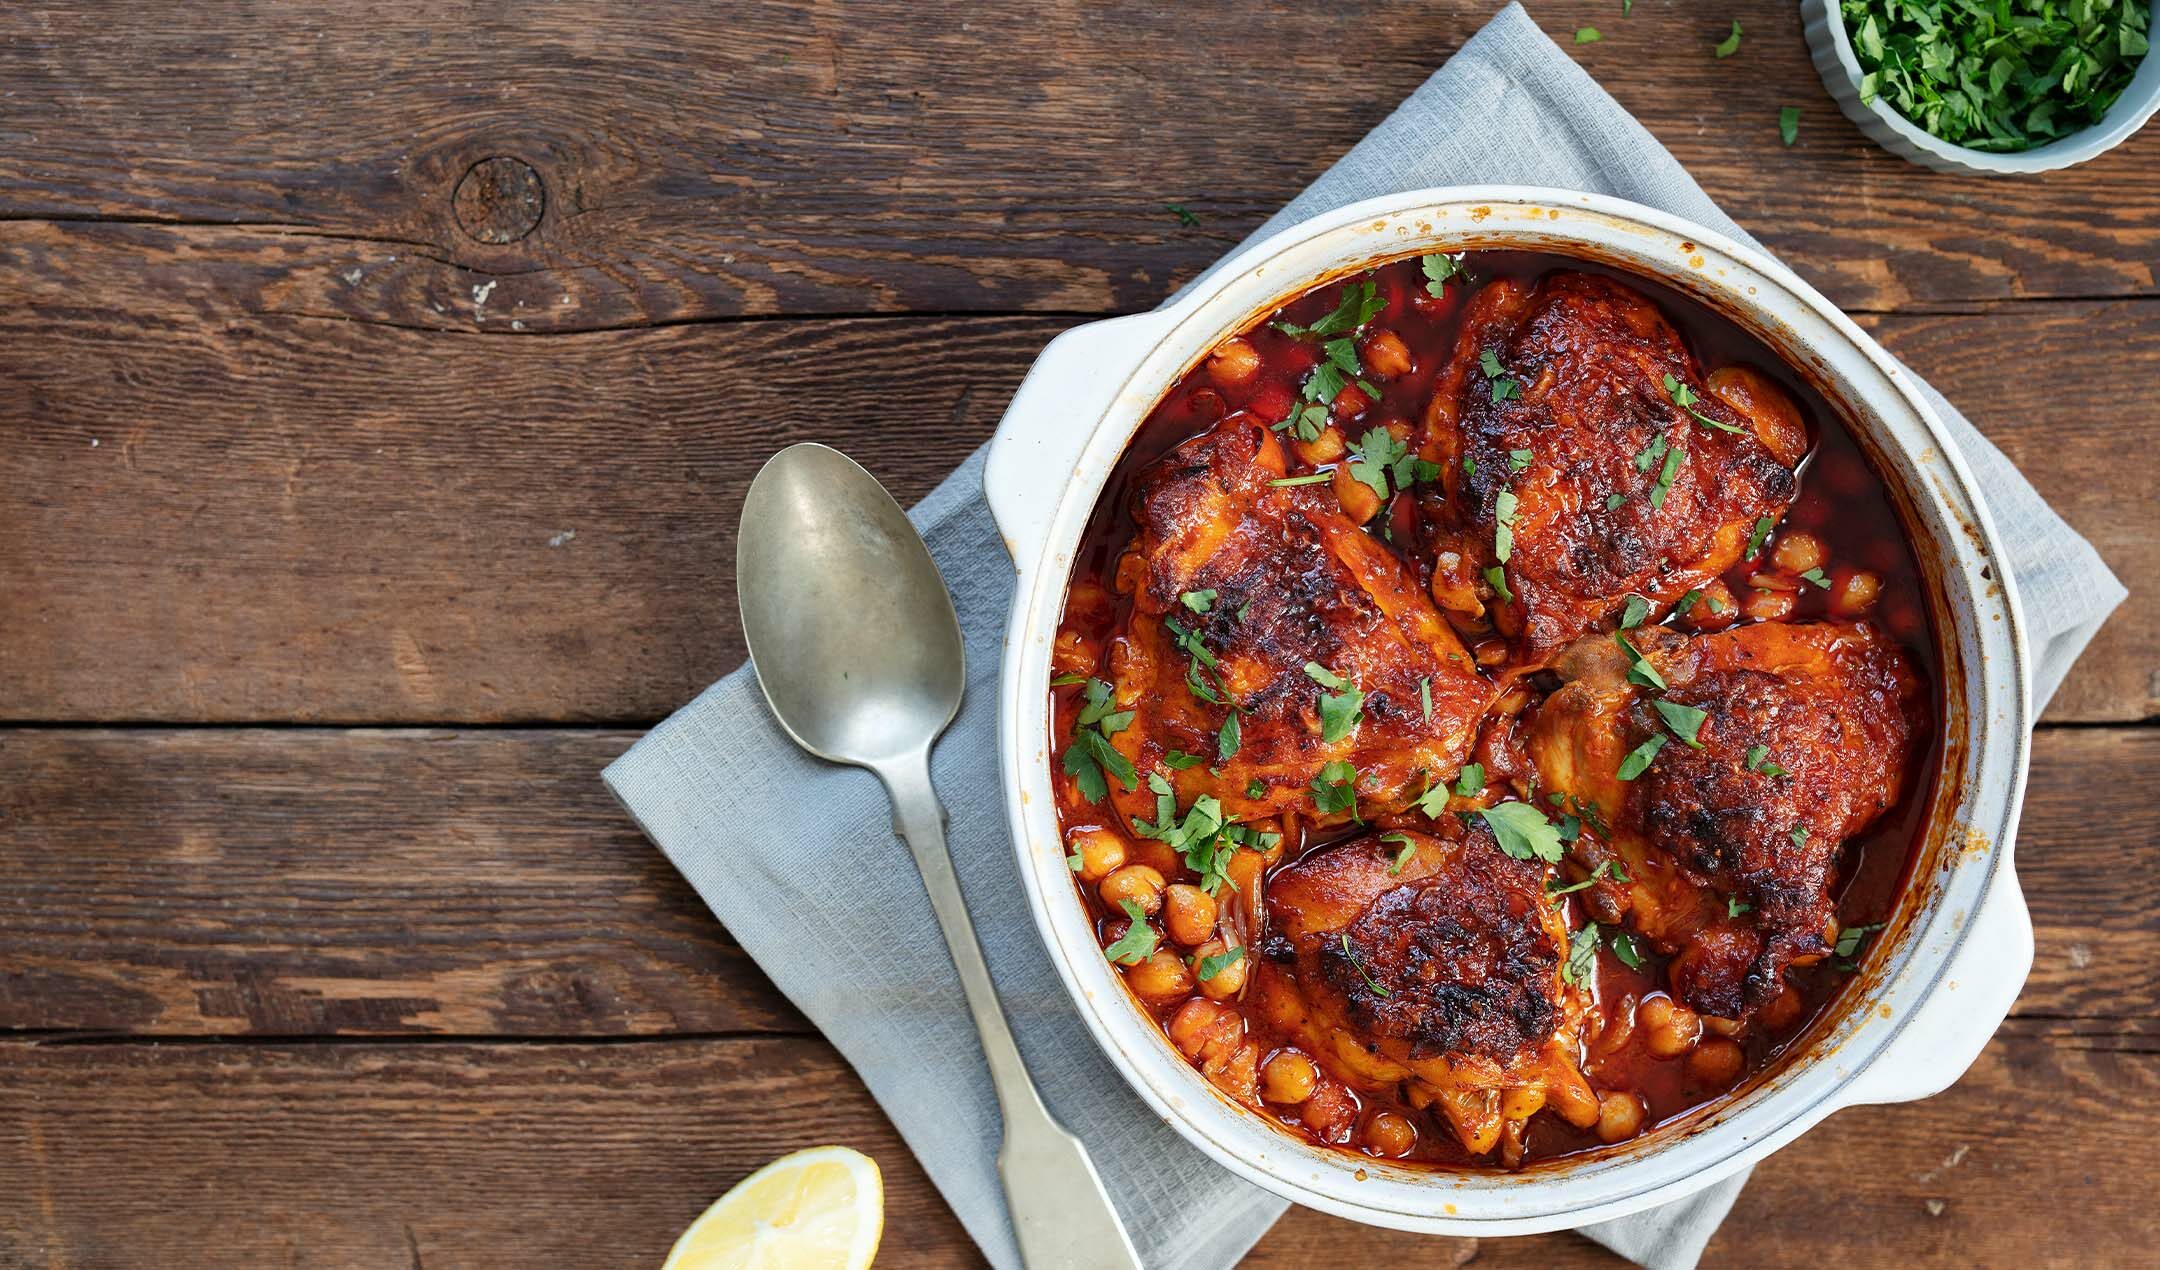 Chicken thighs with harissa and chickpeas recipe | easyFood